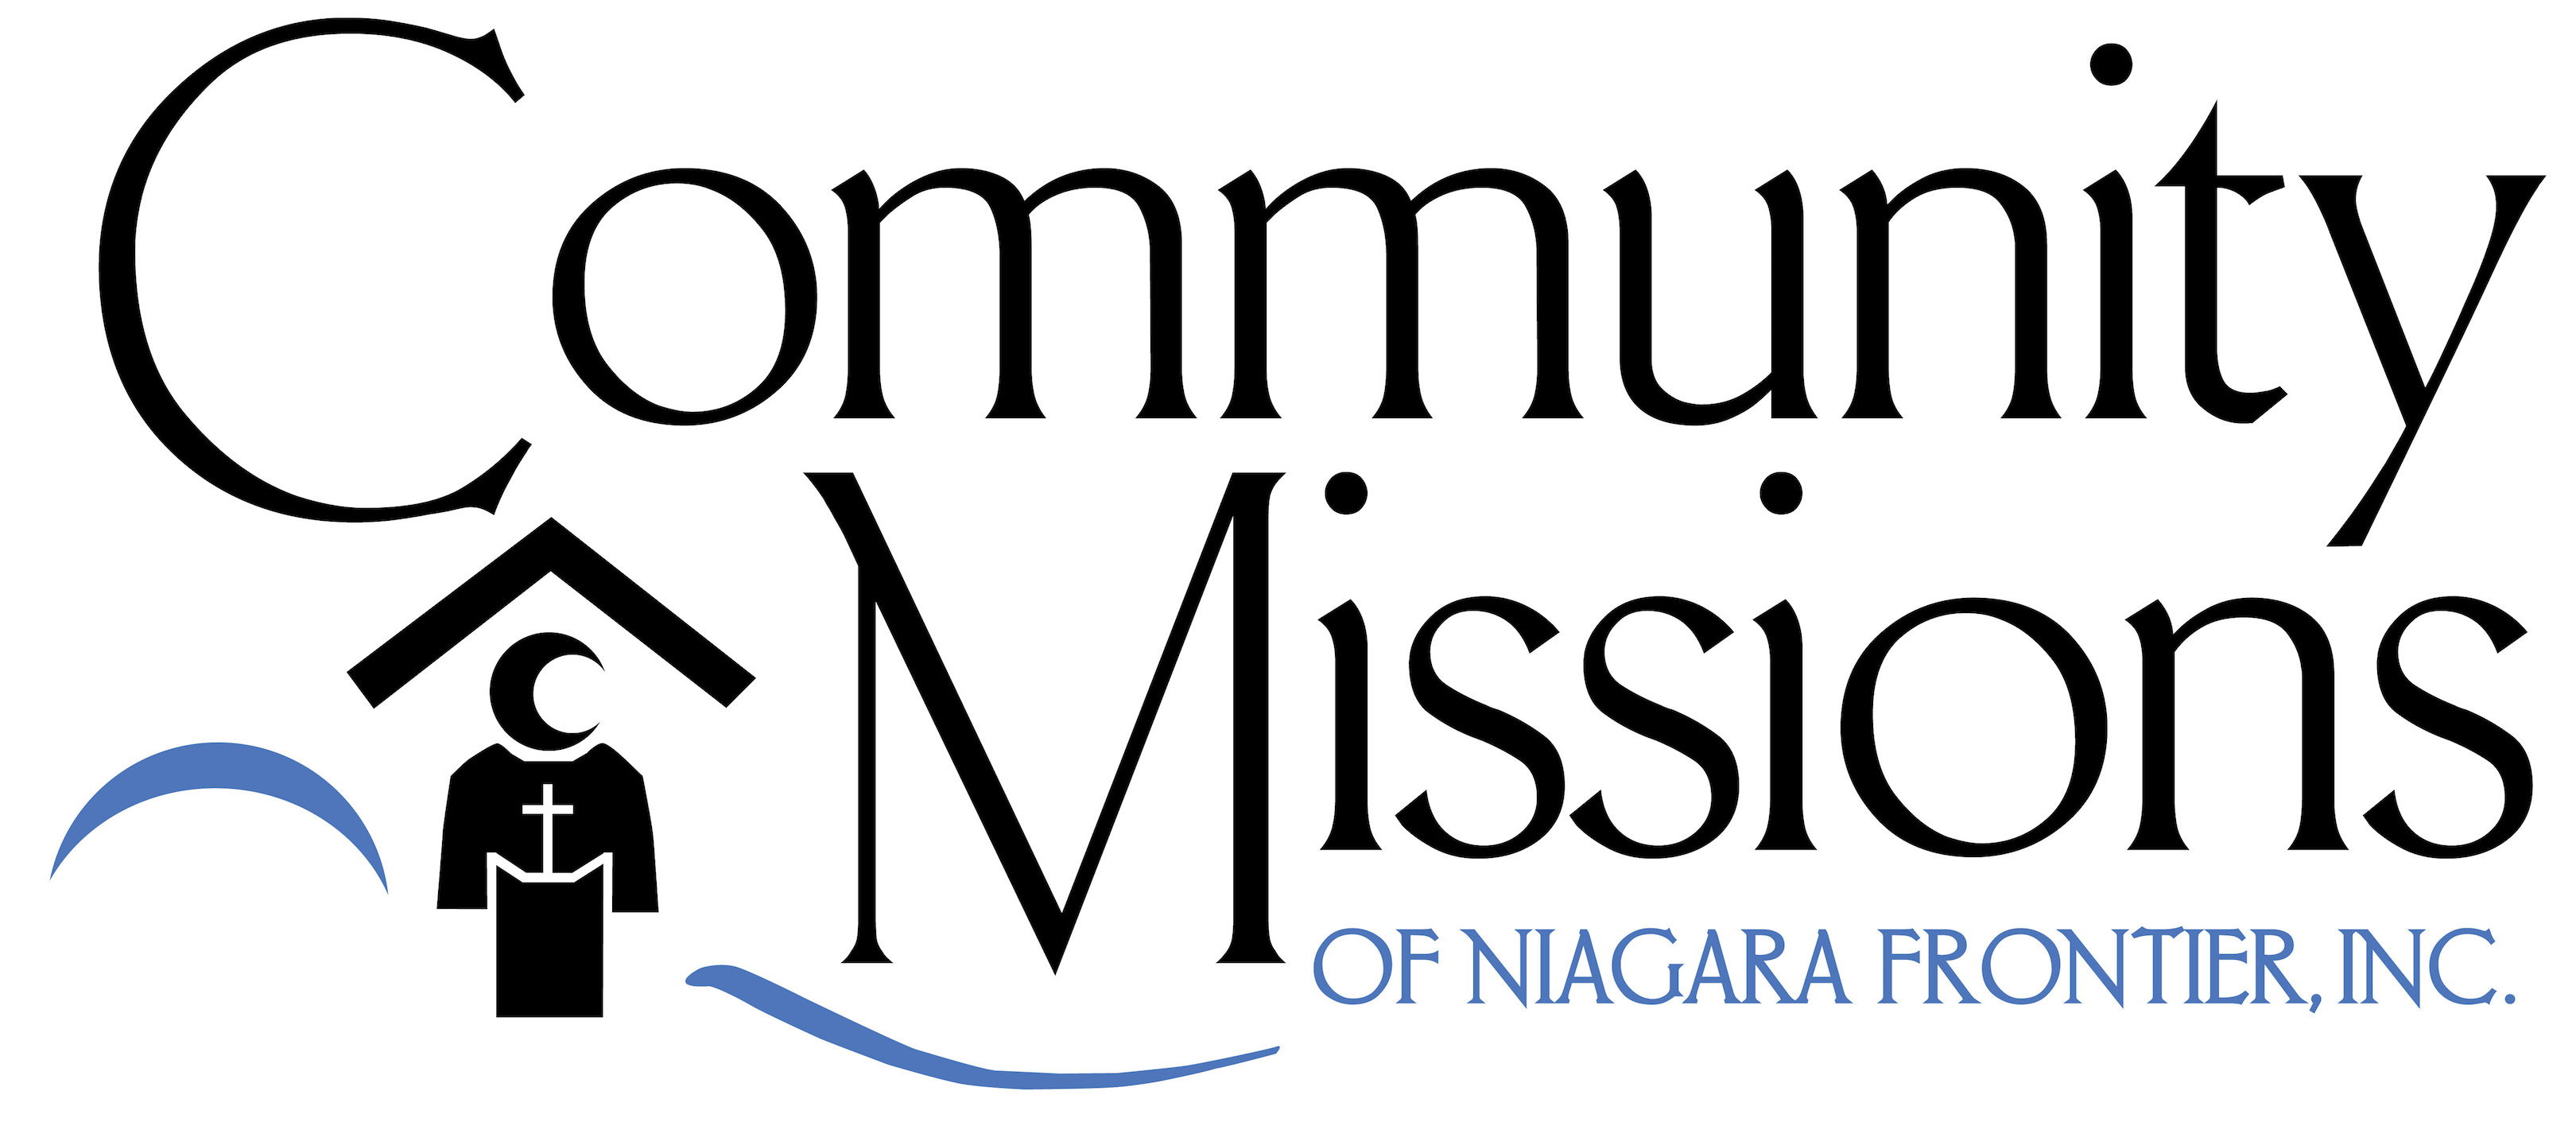 mental disorder, Community Missions, NFMMC announce annual Interfaith Community Prayer Service for Mental Illness Recovery &amp; Understanding